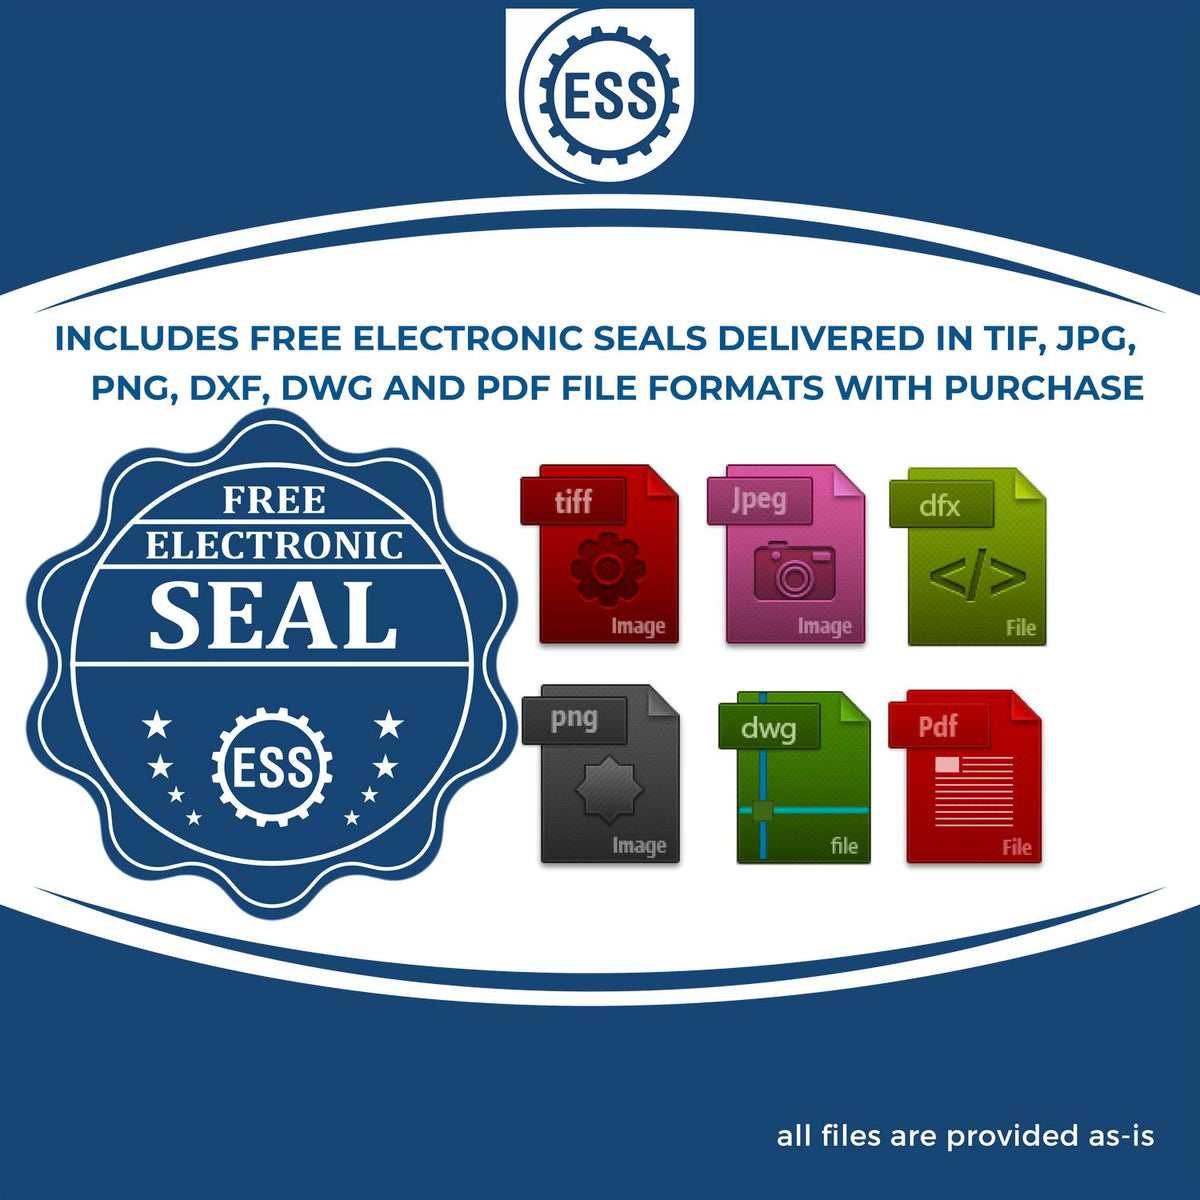 An infographic for the free electronic seal for the State of Missouri Extended Long Reach Engineer Seal illustrating the different file type icons such as DXF, DWG, TIF, JPG and PNG.